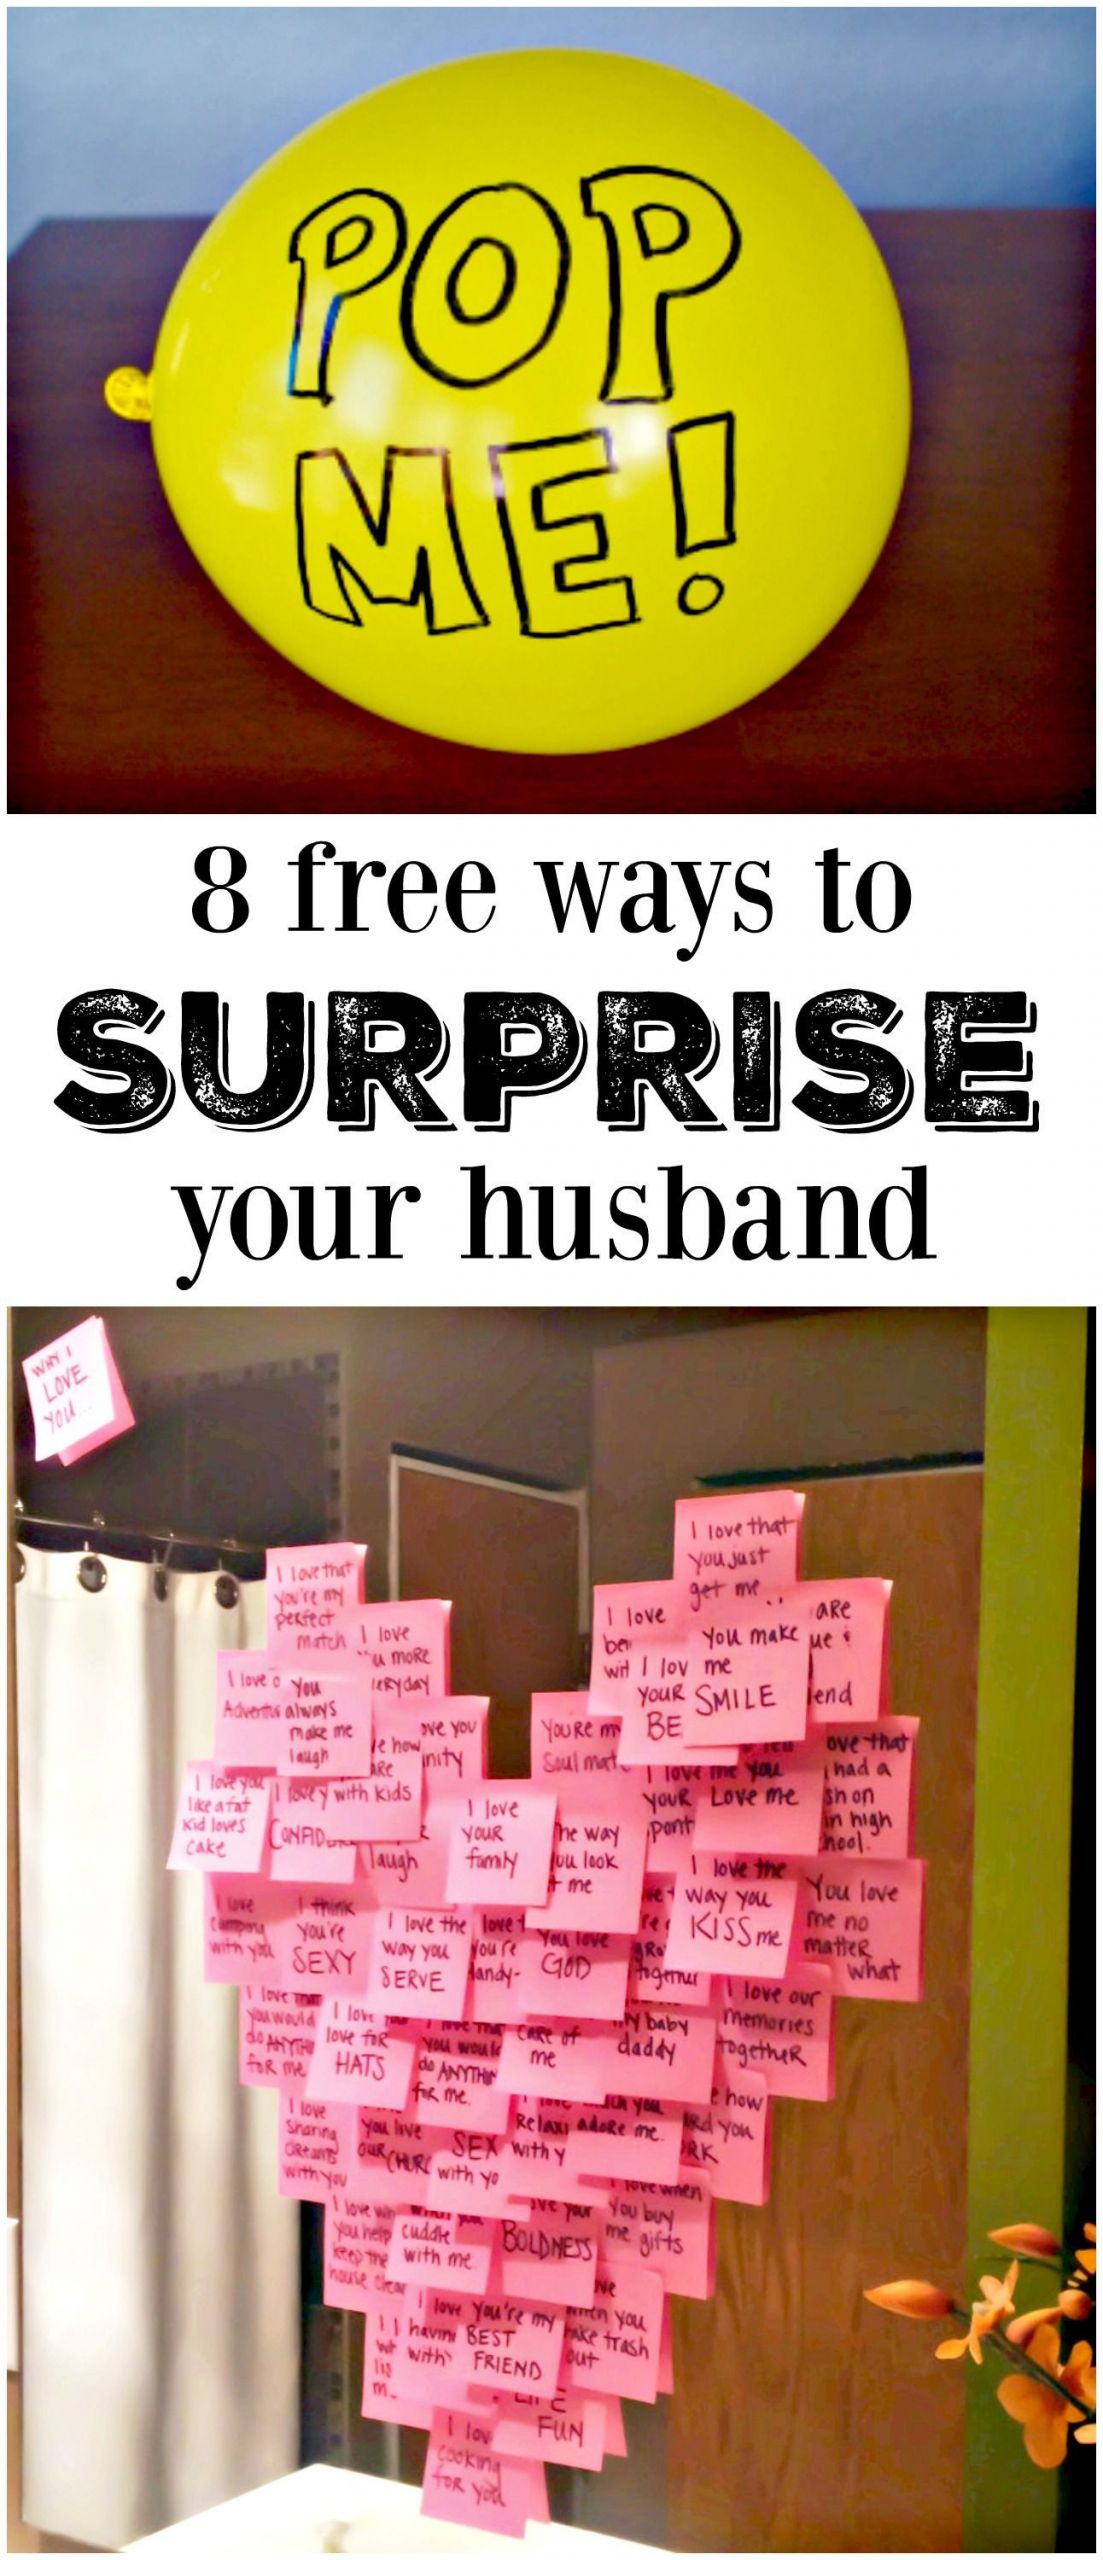 Surprise Gift Ideas For Boyfriend
 8 Meaningful Ways to Make His Day DIY Ideas